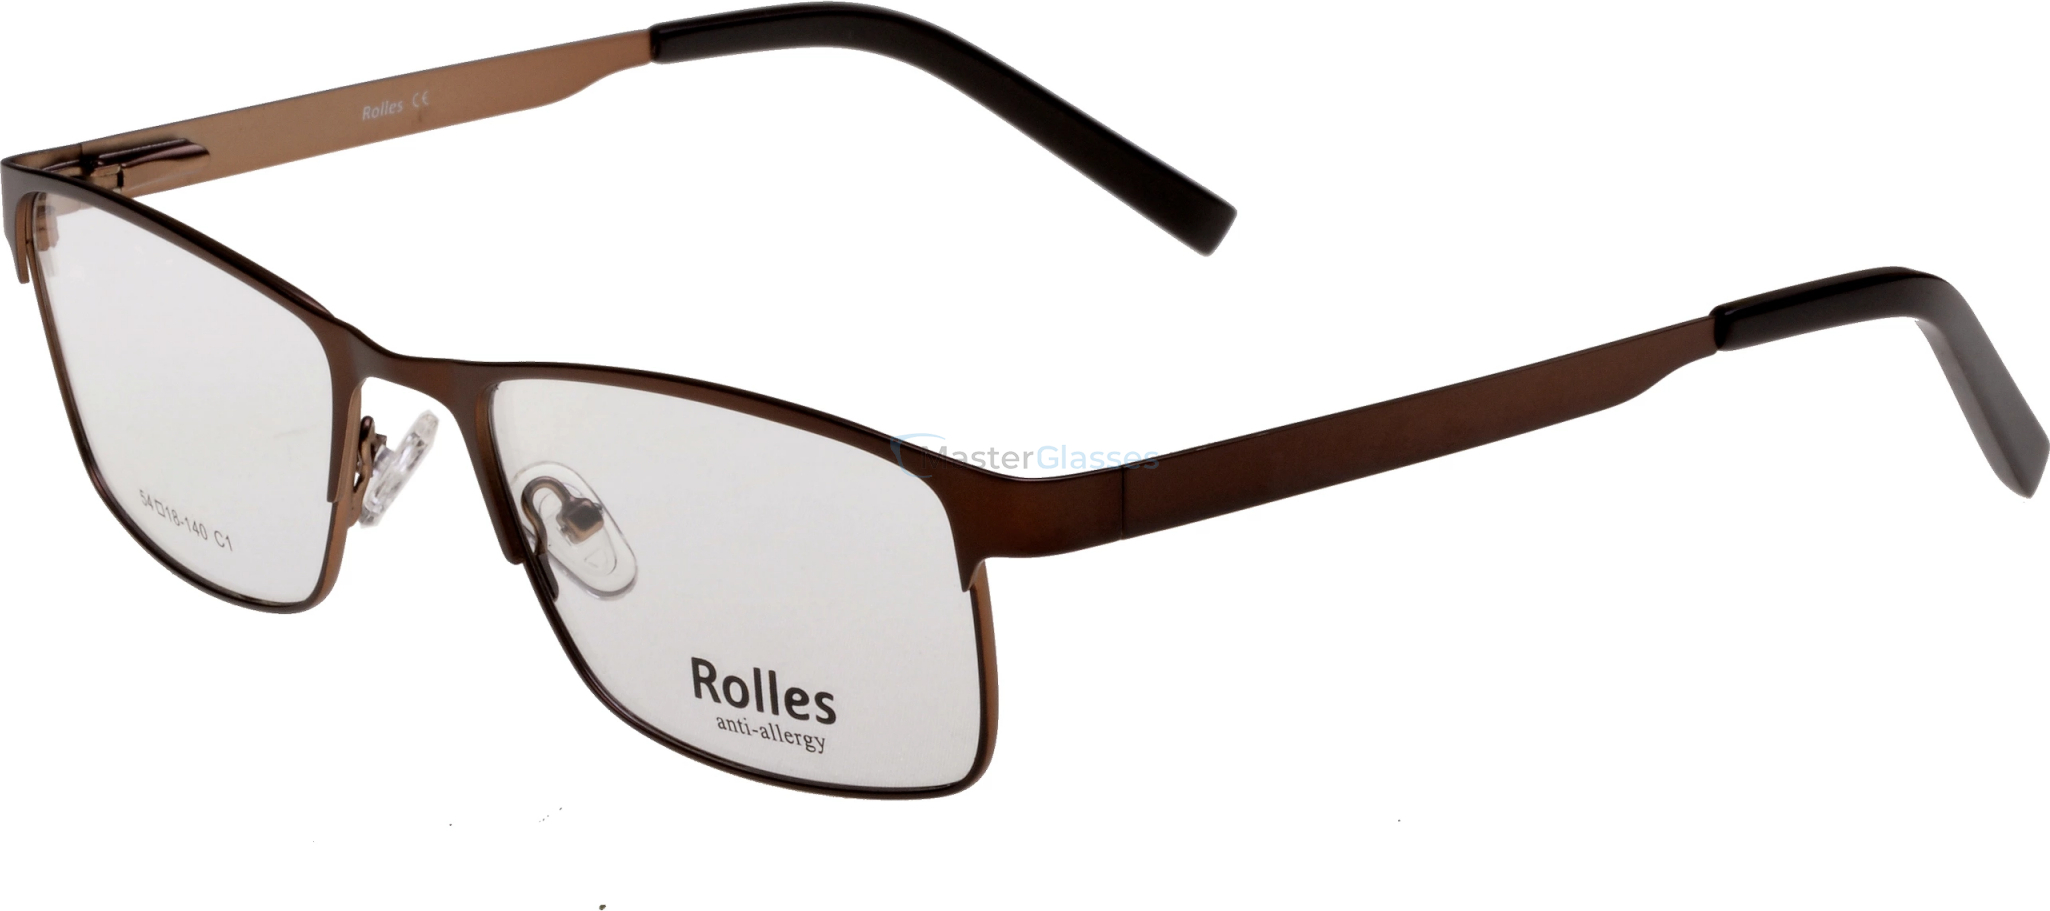  Rolles 352 01